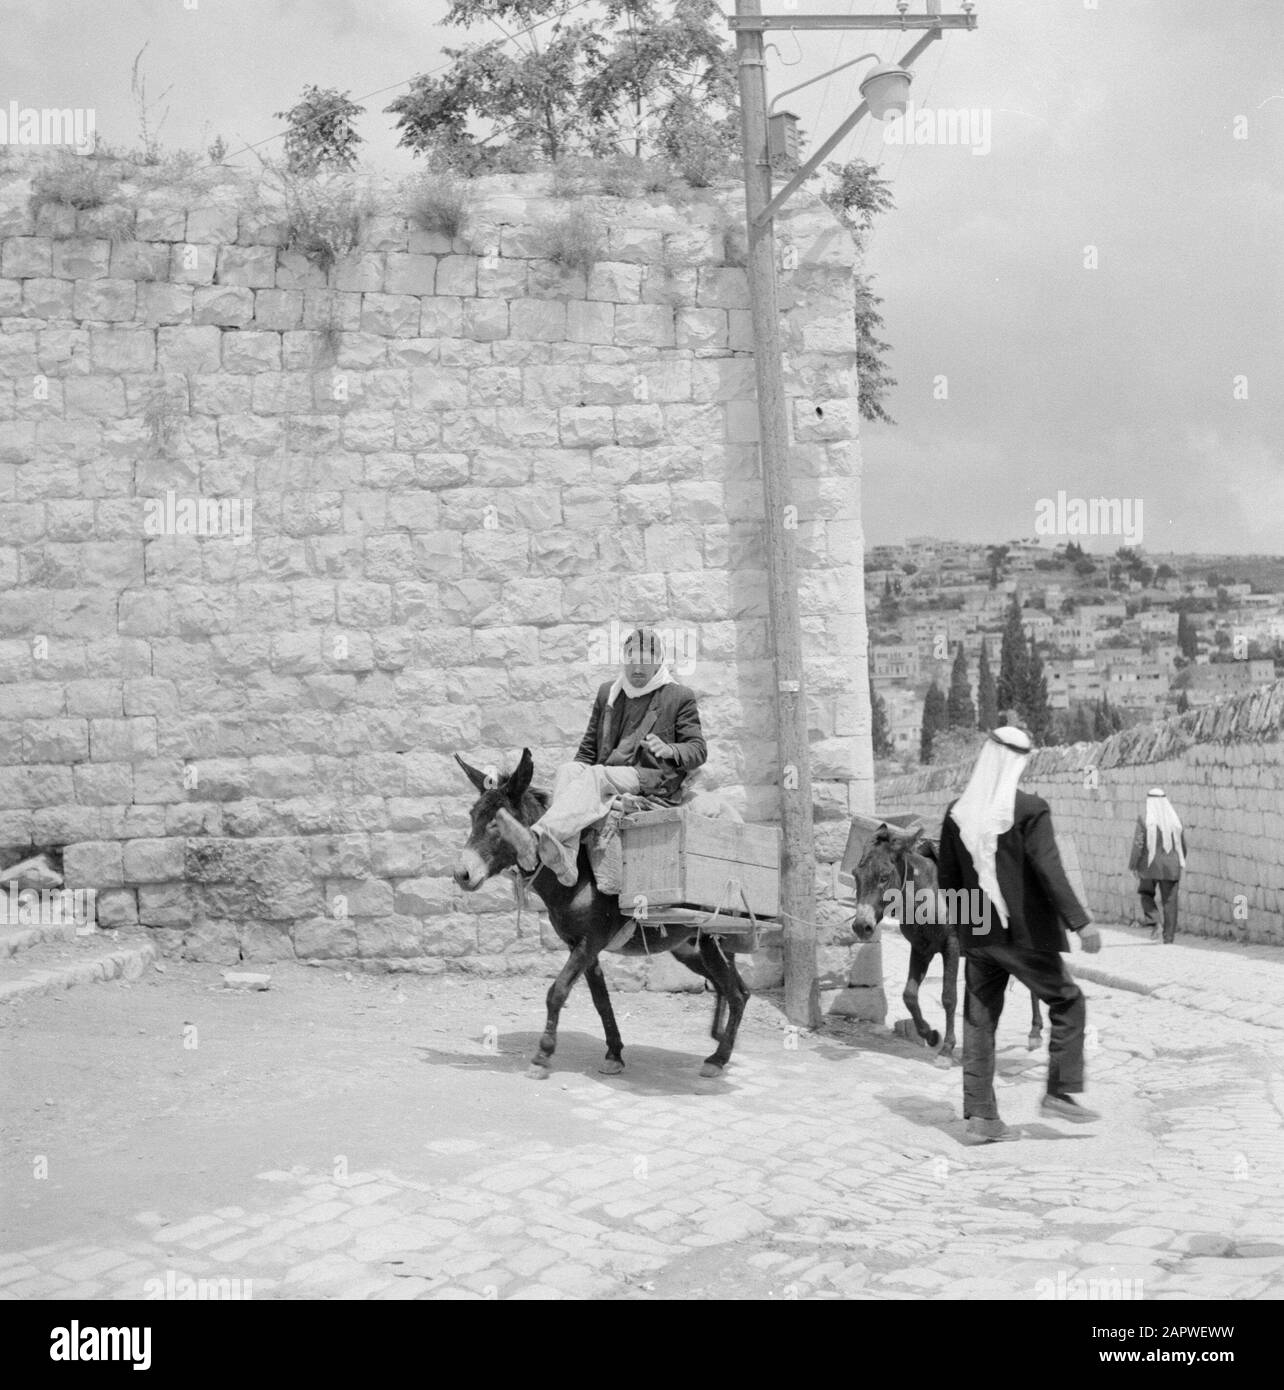 Israel: Nazareth  Man riding on loaded donkey passes a pedestrian Date: undated Location: Galilee, Israel, Nazareth Keywords: donkeys, street images, means of transport, pedestrian Stock Photo